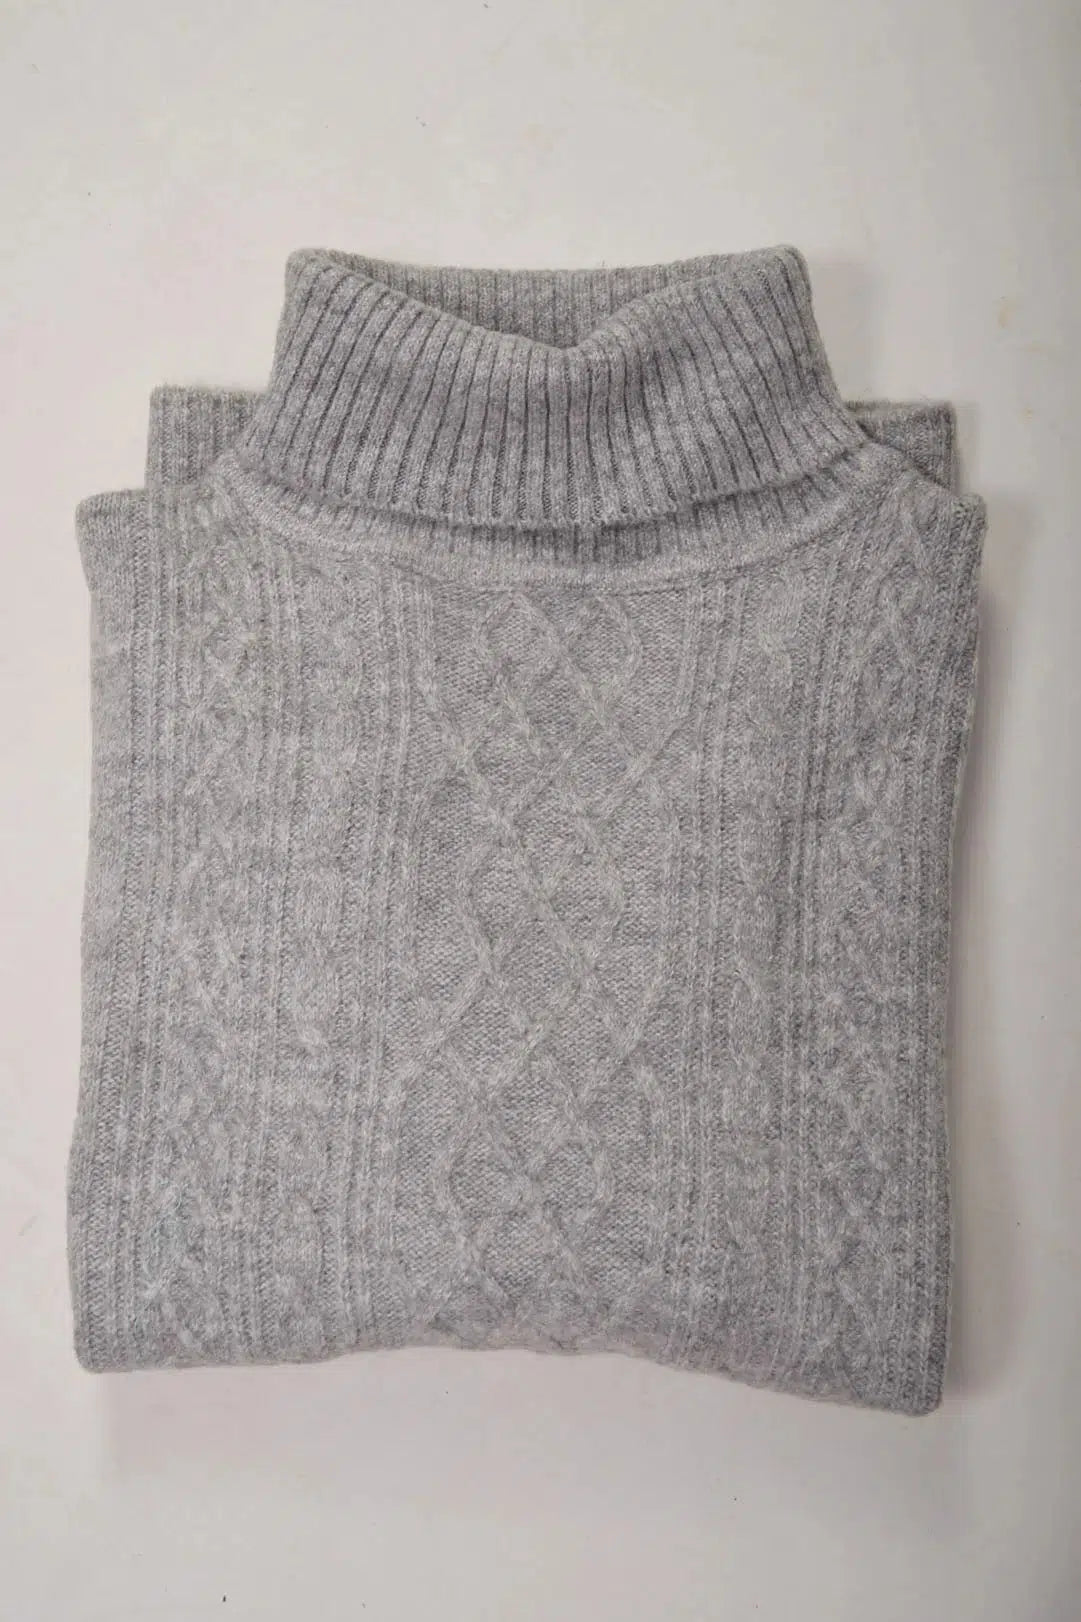 Yessica Roll Neck Cable Knit Jumper